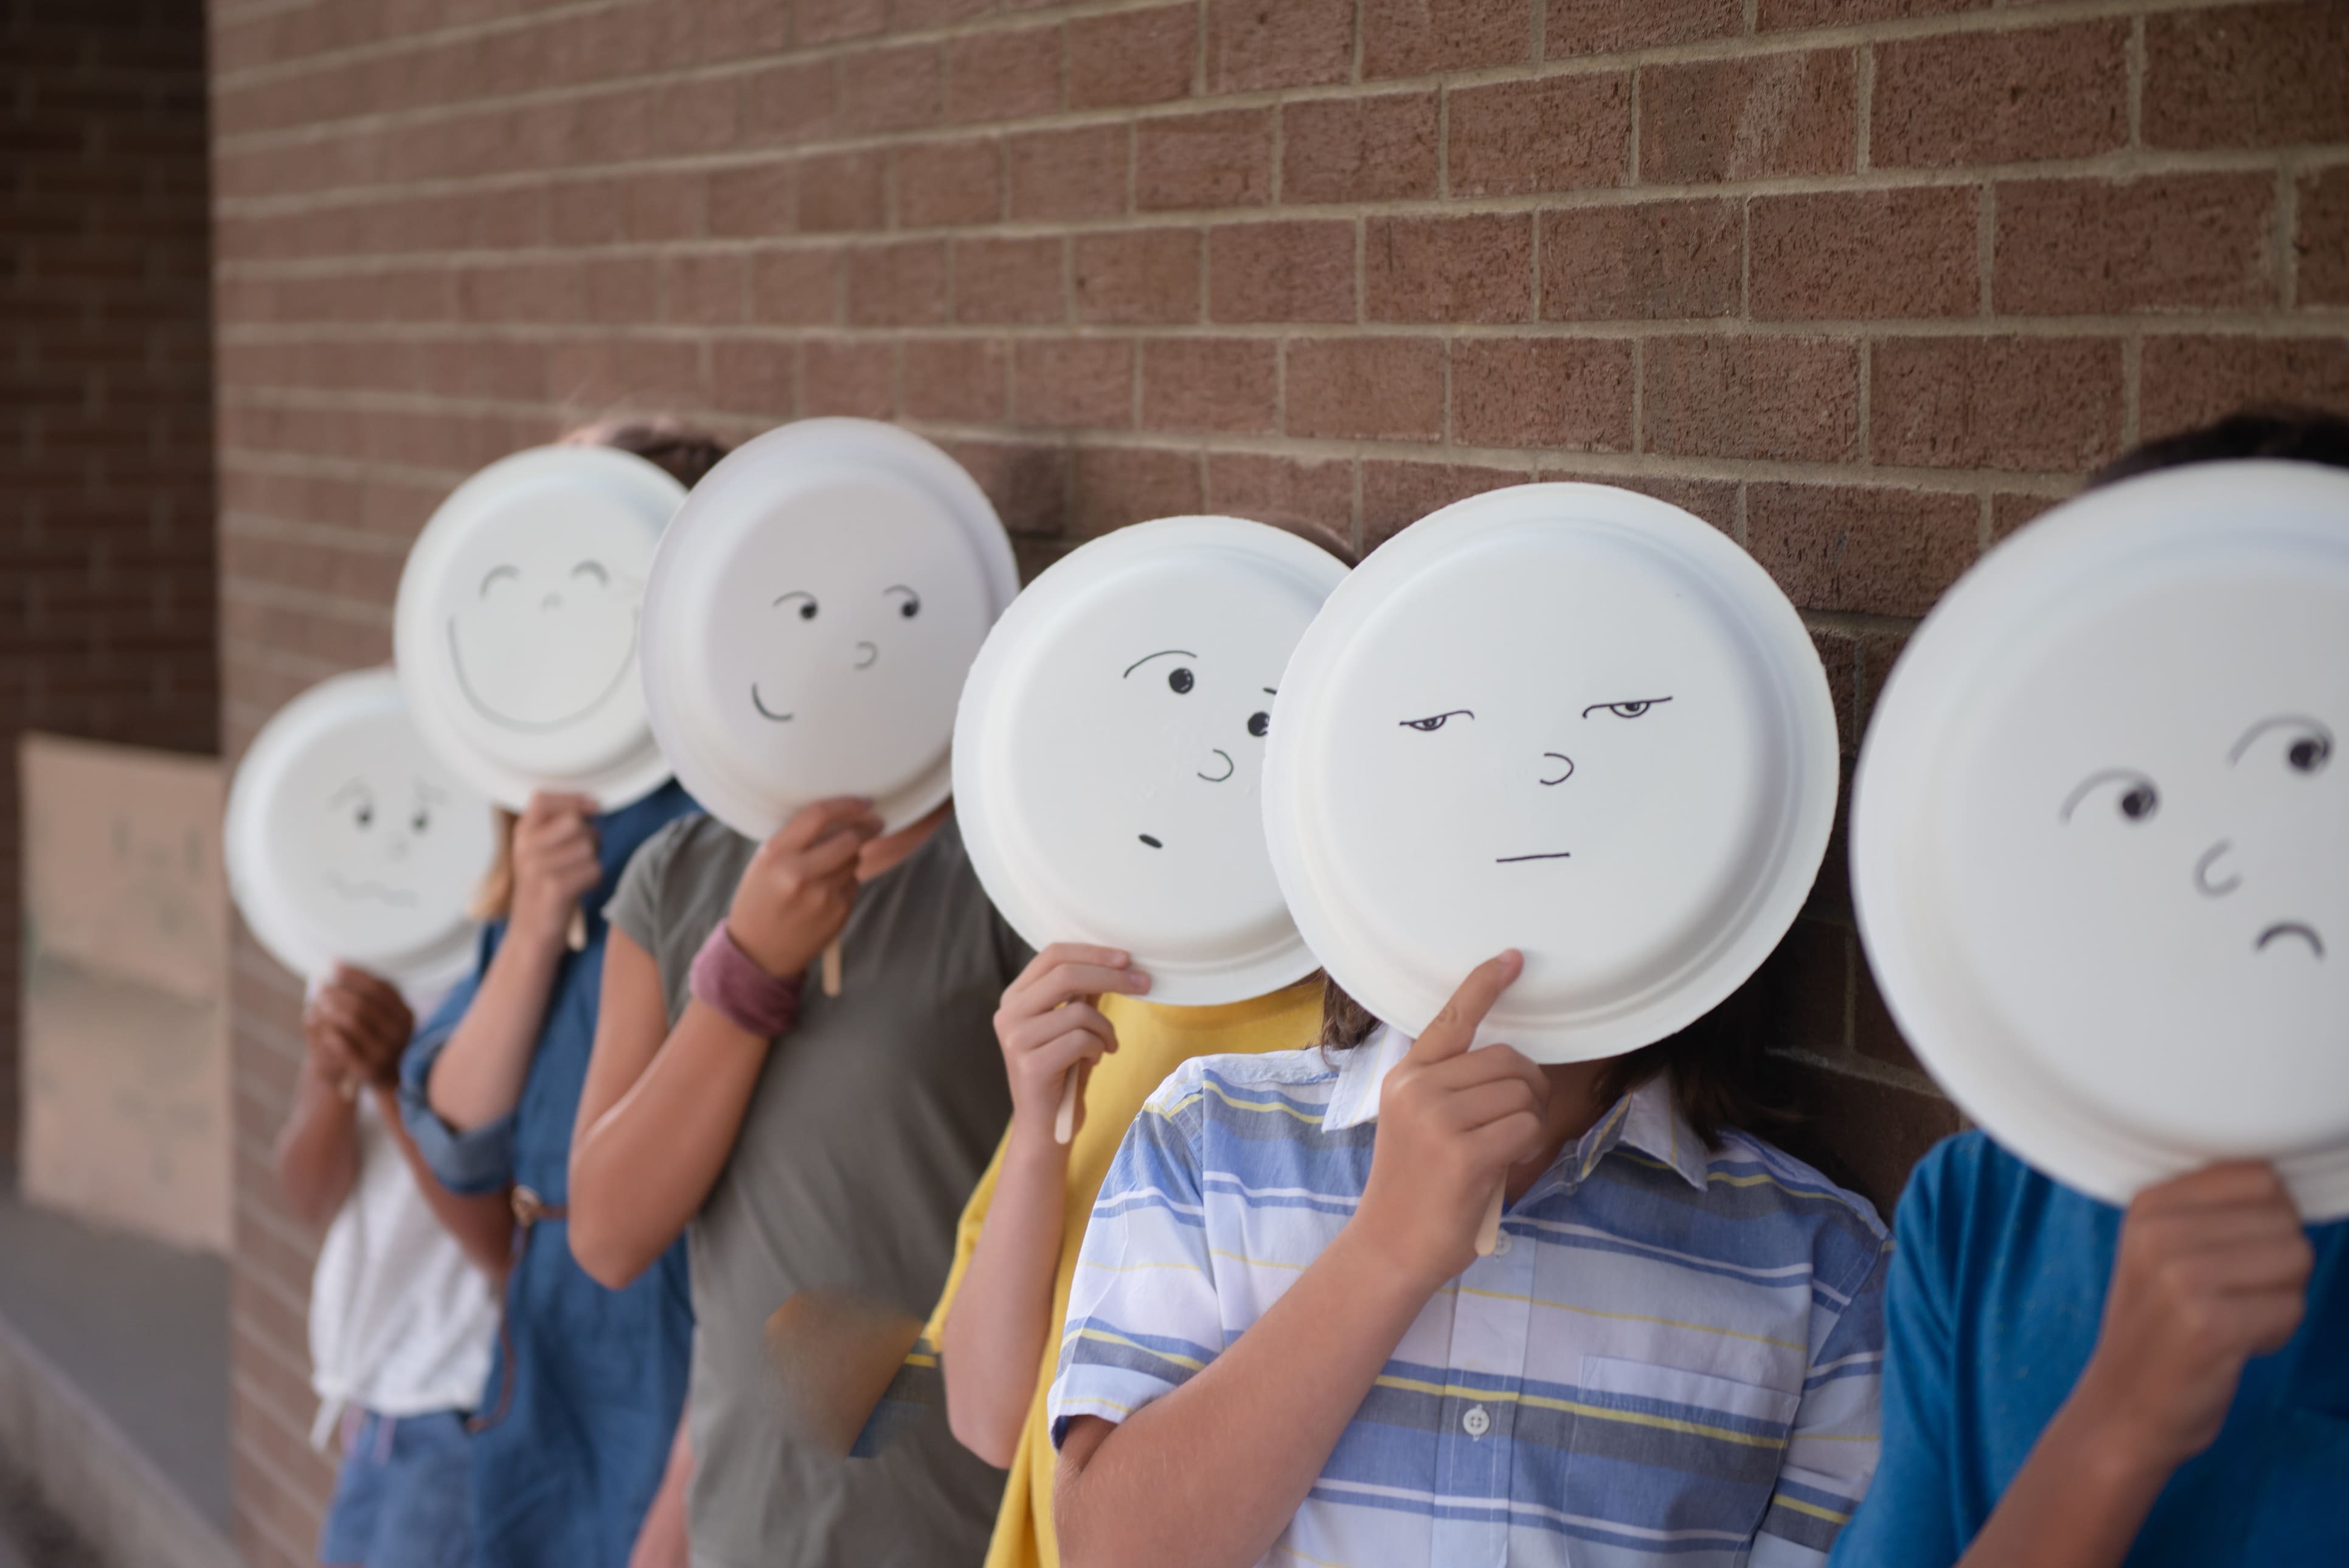 Children in a row holding paper plates over their faces. The paper plates have faces drawn on in marker.